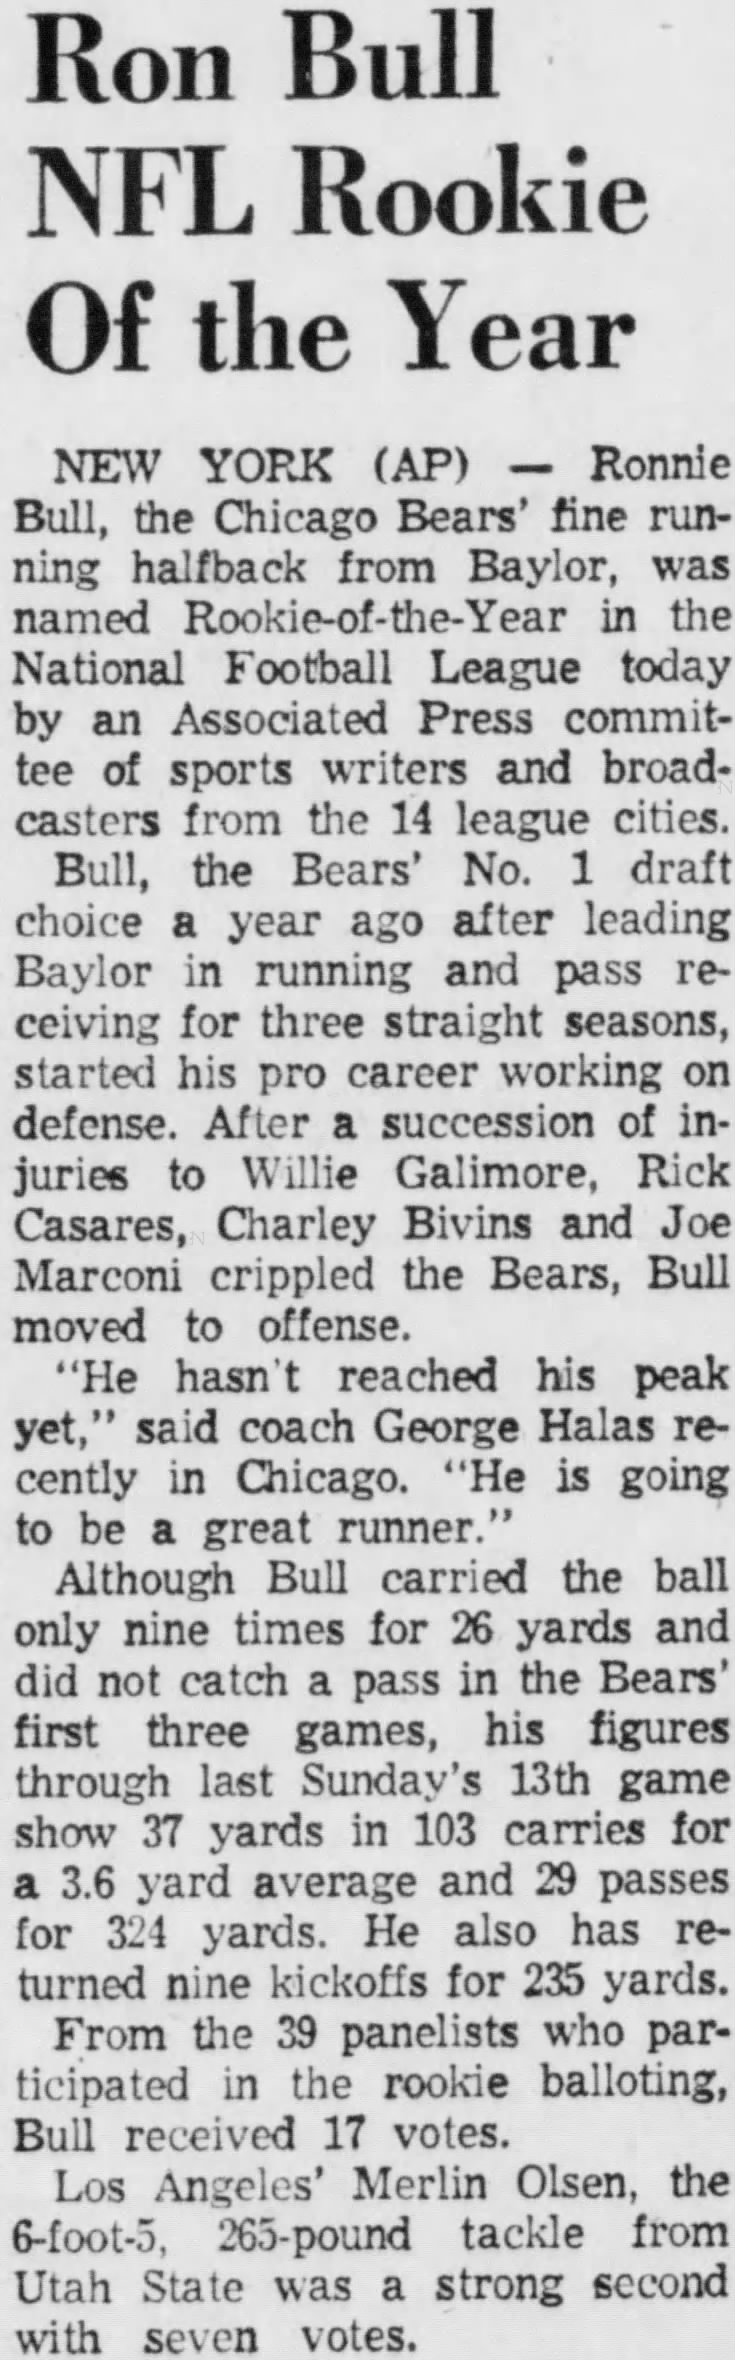 Ron Bull NFL Rookie Of the Year